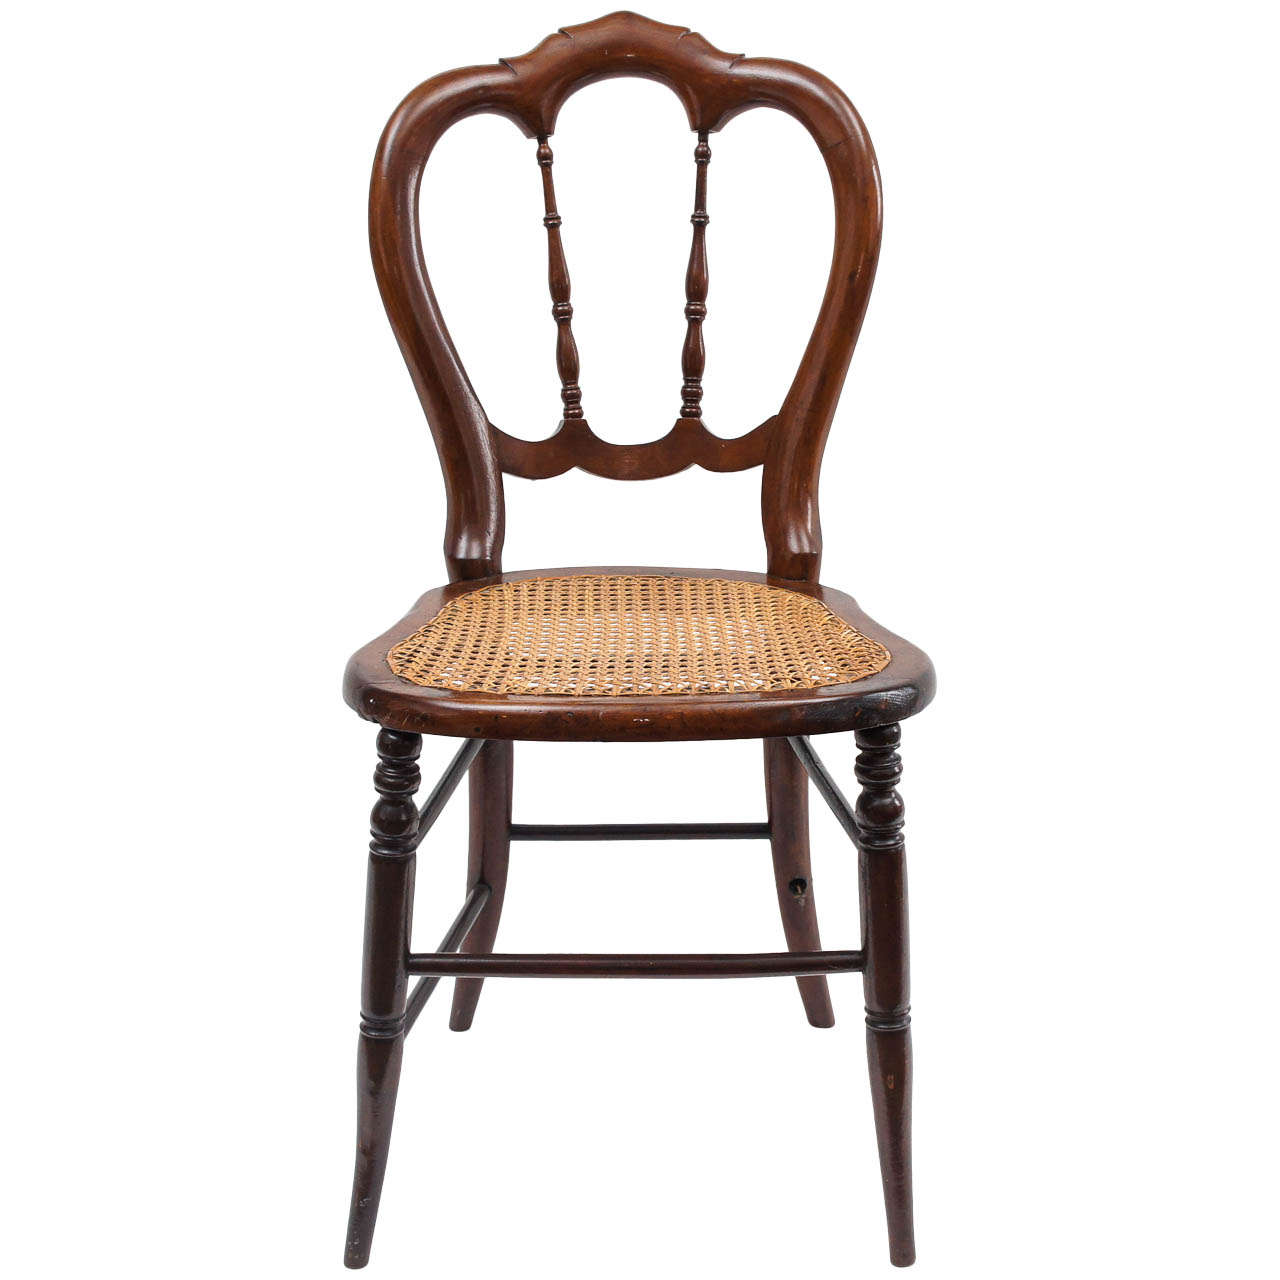 Late 19th Century Single Side Chair for the Bedroom, Office or Boudoir